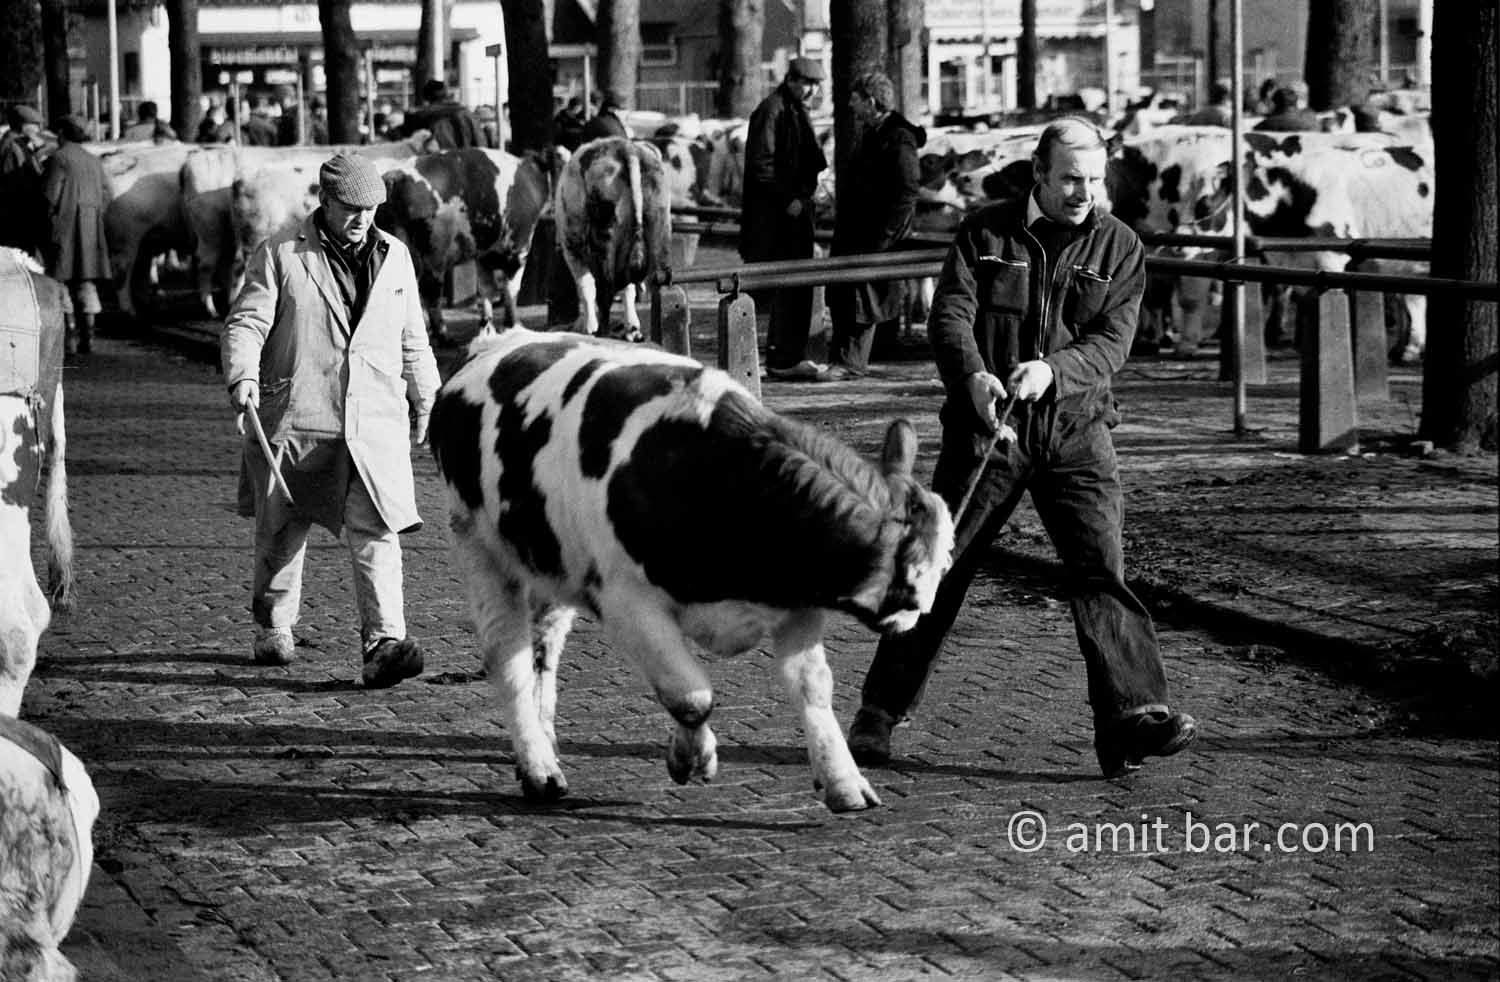 Picador: A cattle-market worker takes a cow to the new owner